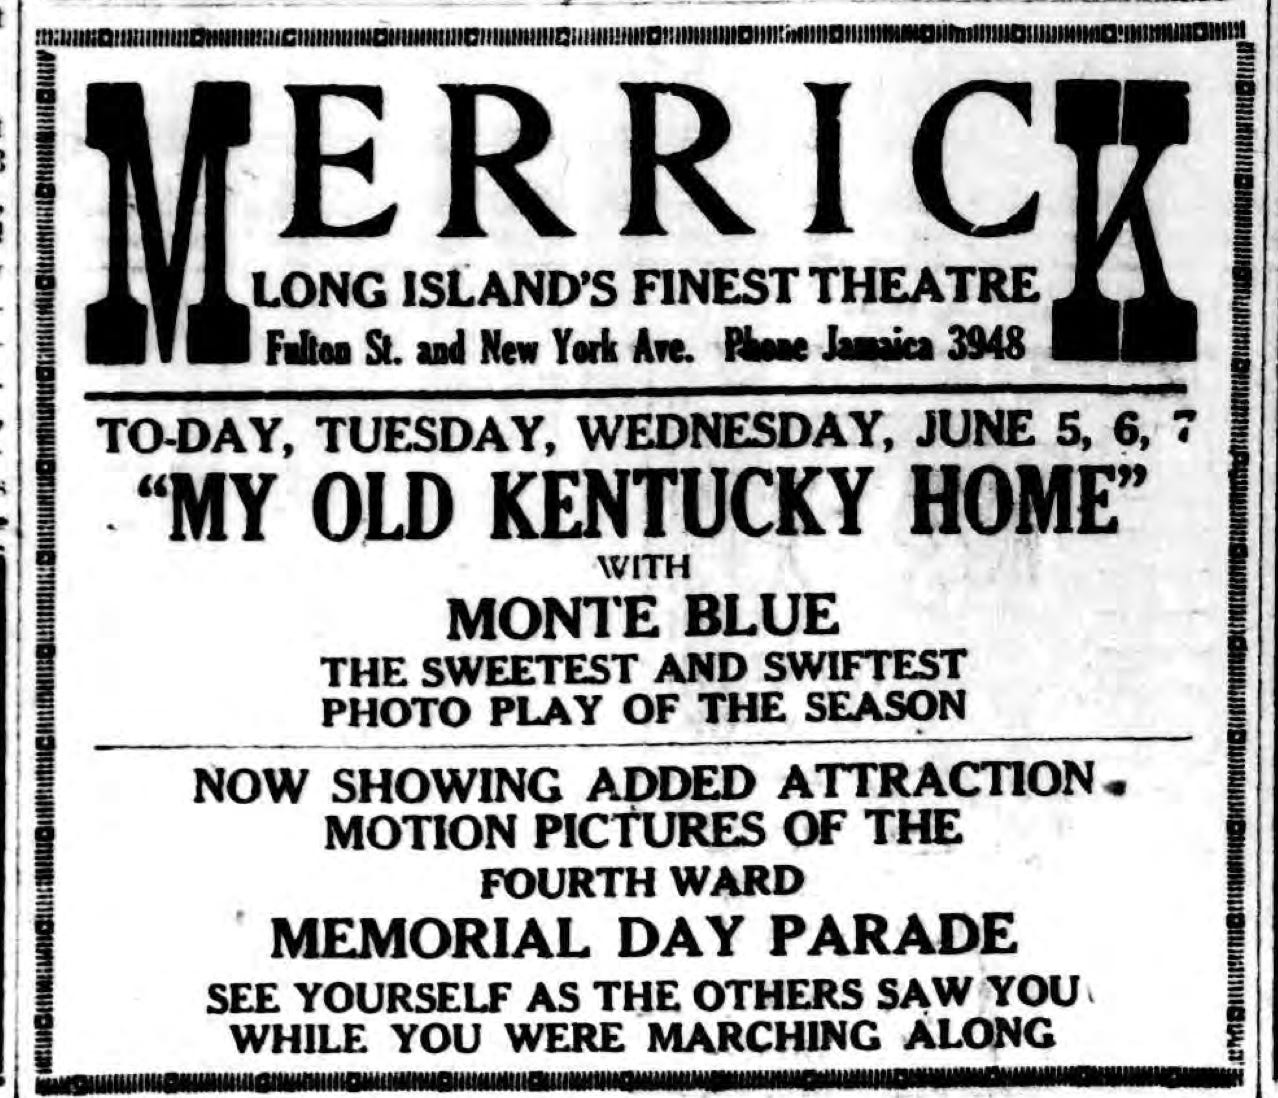 Image is a reproduction of an advertisement for the Merrick Theater on Fulton St. (now Jamaica Ave) in Jamaica, Queens. The ad includes billing for "My Old Kentucky Home" starring Monte Blue but also text describing an "added attraction": "Motion Pictures of the Fourth Ward Memorial Day Parade."